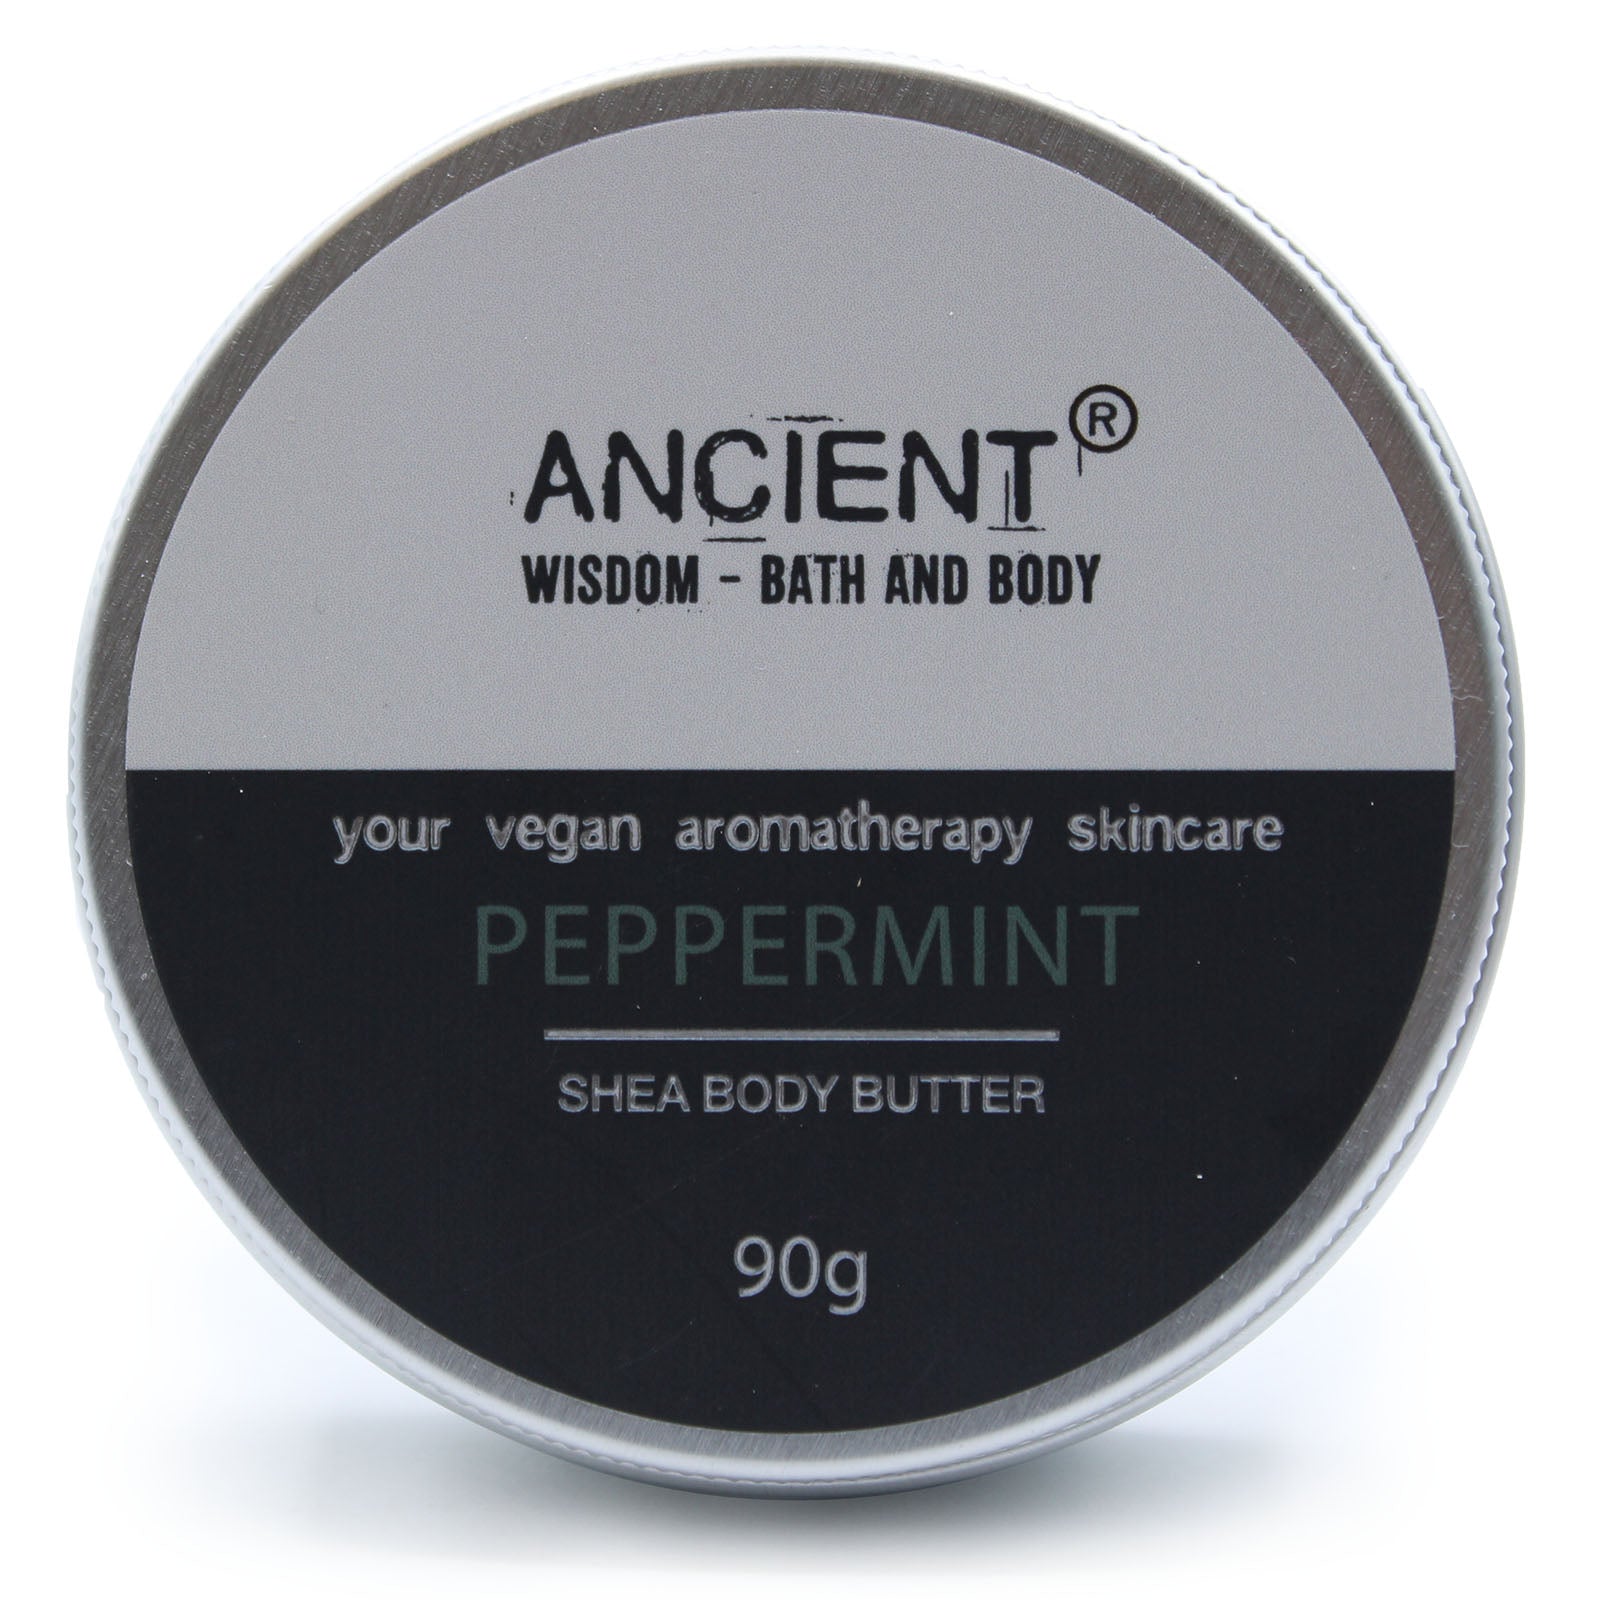 View Aromatherapy Shea Body Butter 90g Peppermint information